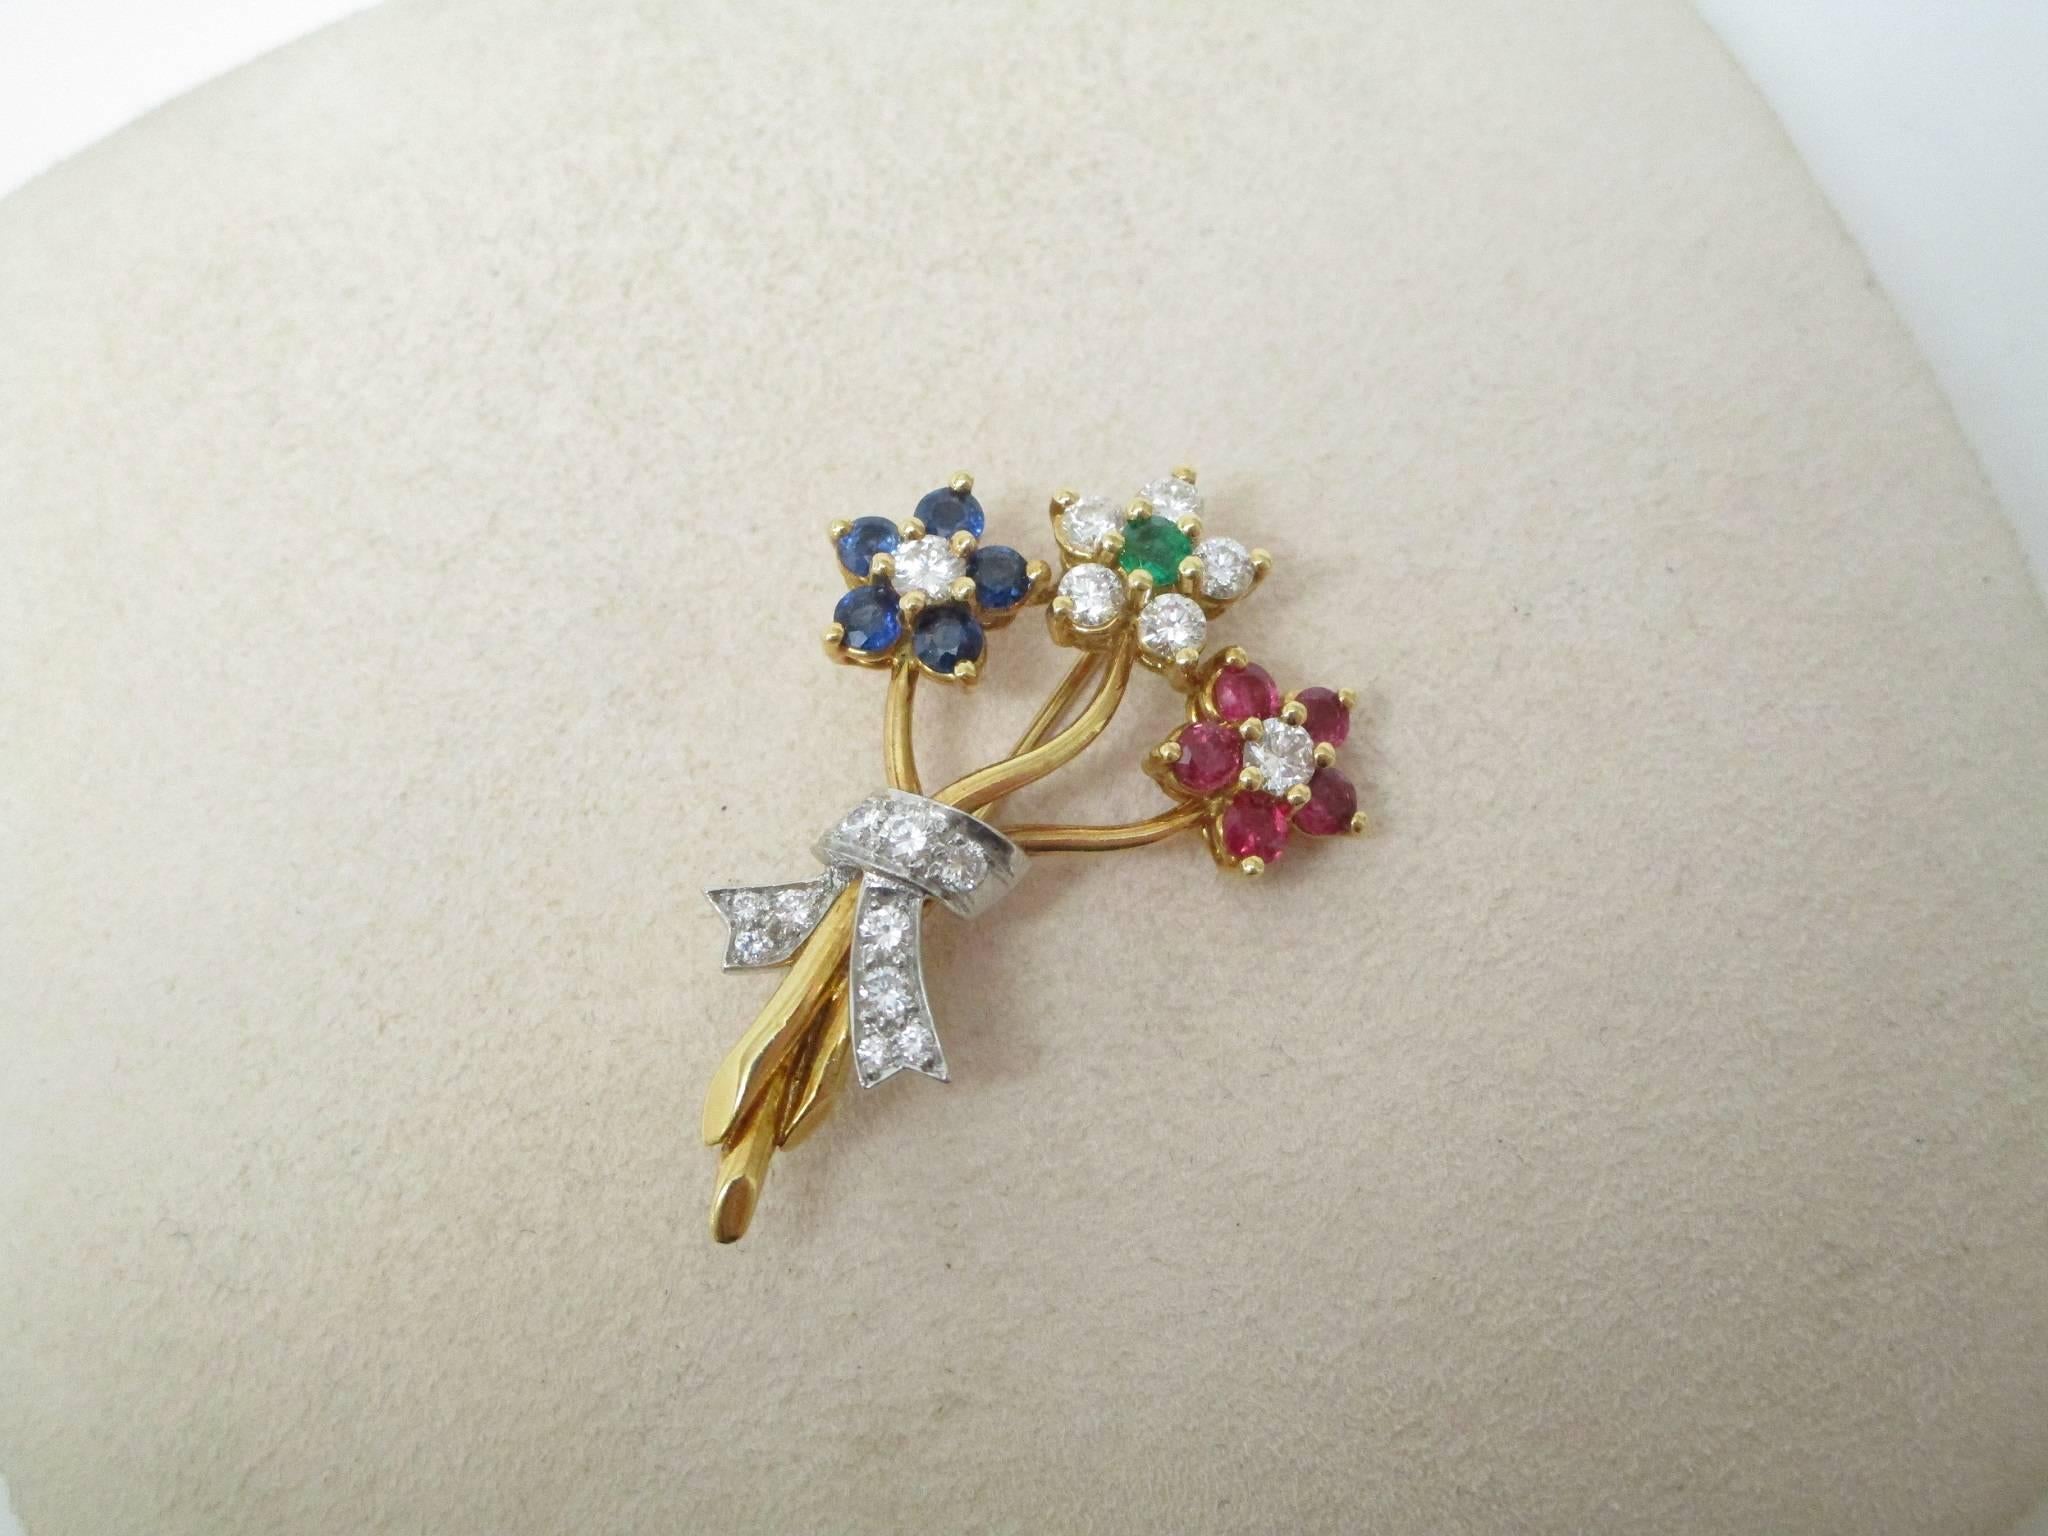 This lovely pin features three blooms of Ruby, Sapphire, Emerald, and Diamonds, all nestled in 18K white and yellow gold. This is great way to give flowers that will never fade. Mothers love to get posies, for Mother's Day or just because it's